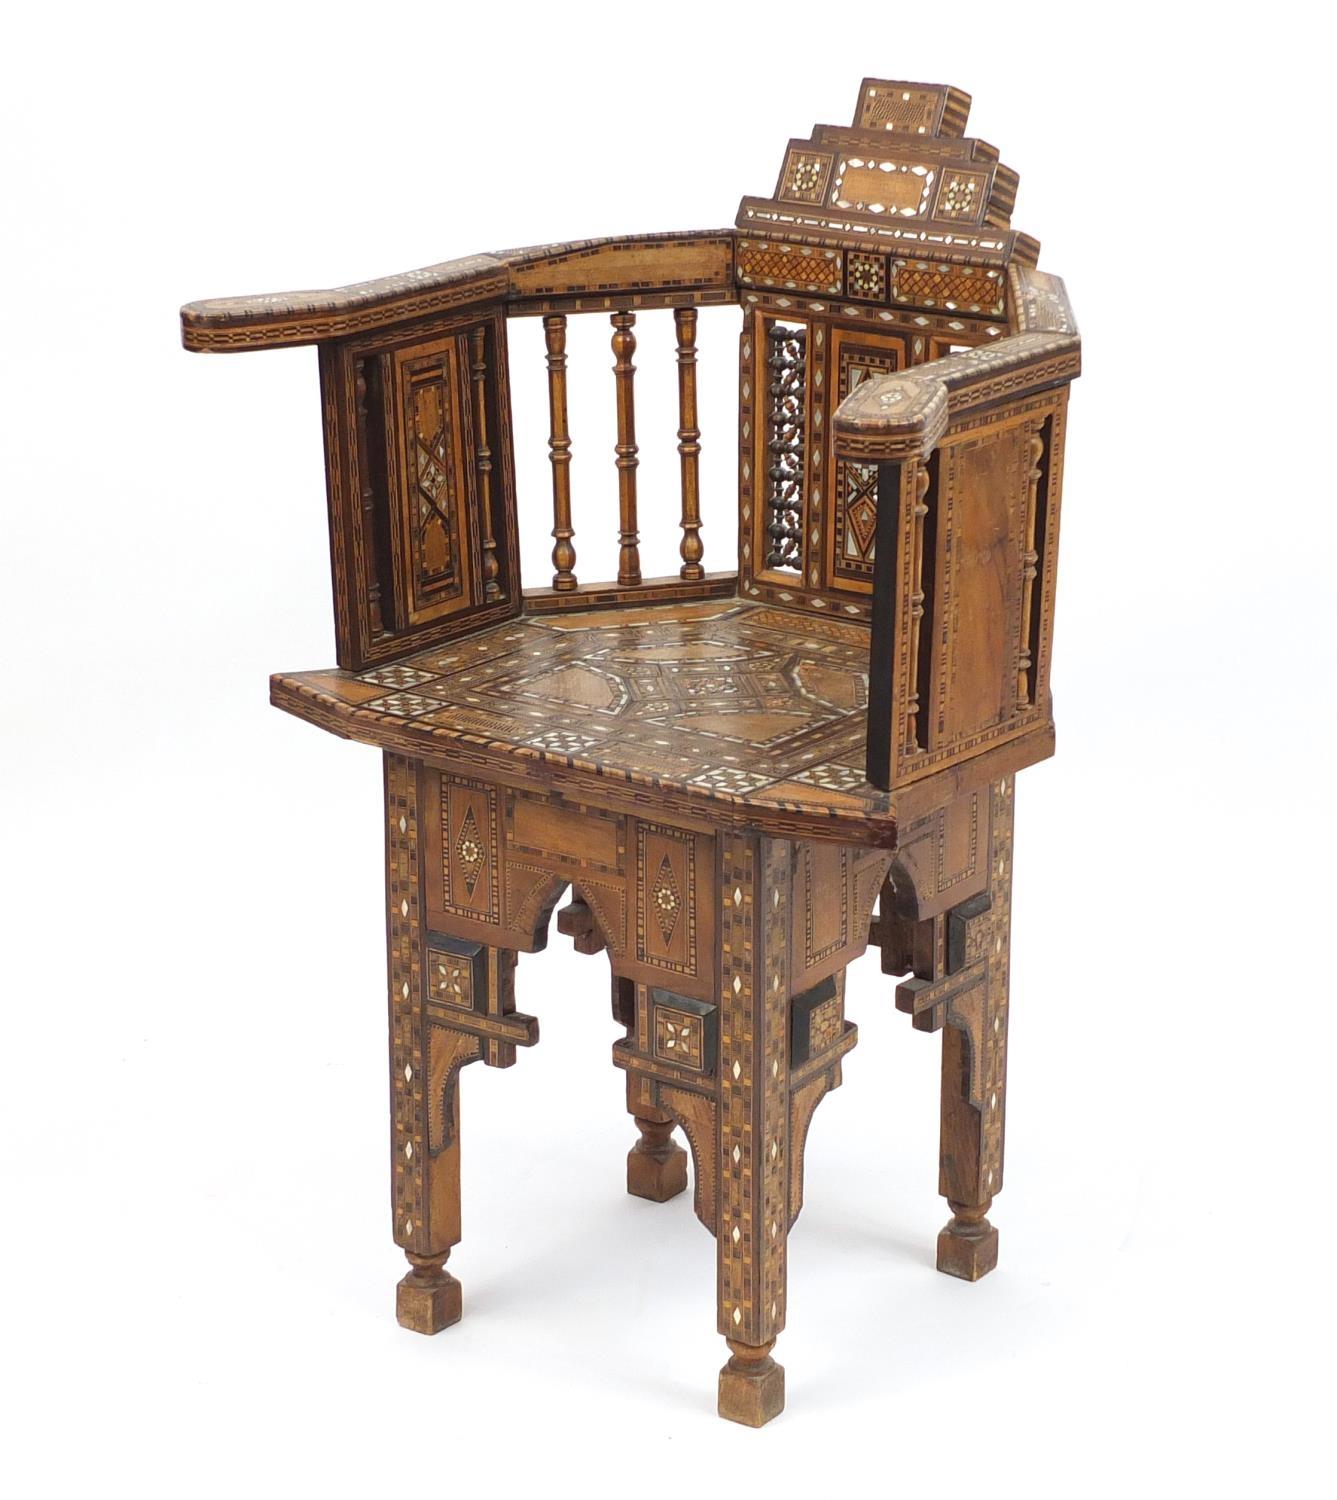 Moorish design elbow chair, with geometric parquetry inlay, probably Syrian, 88cm high : For Further